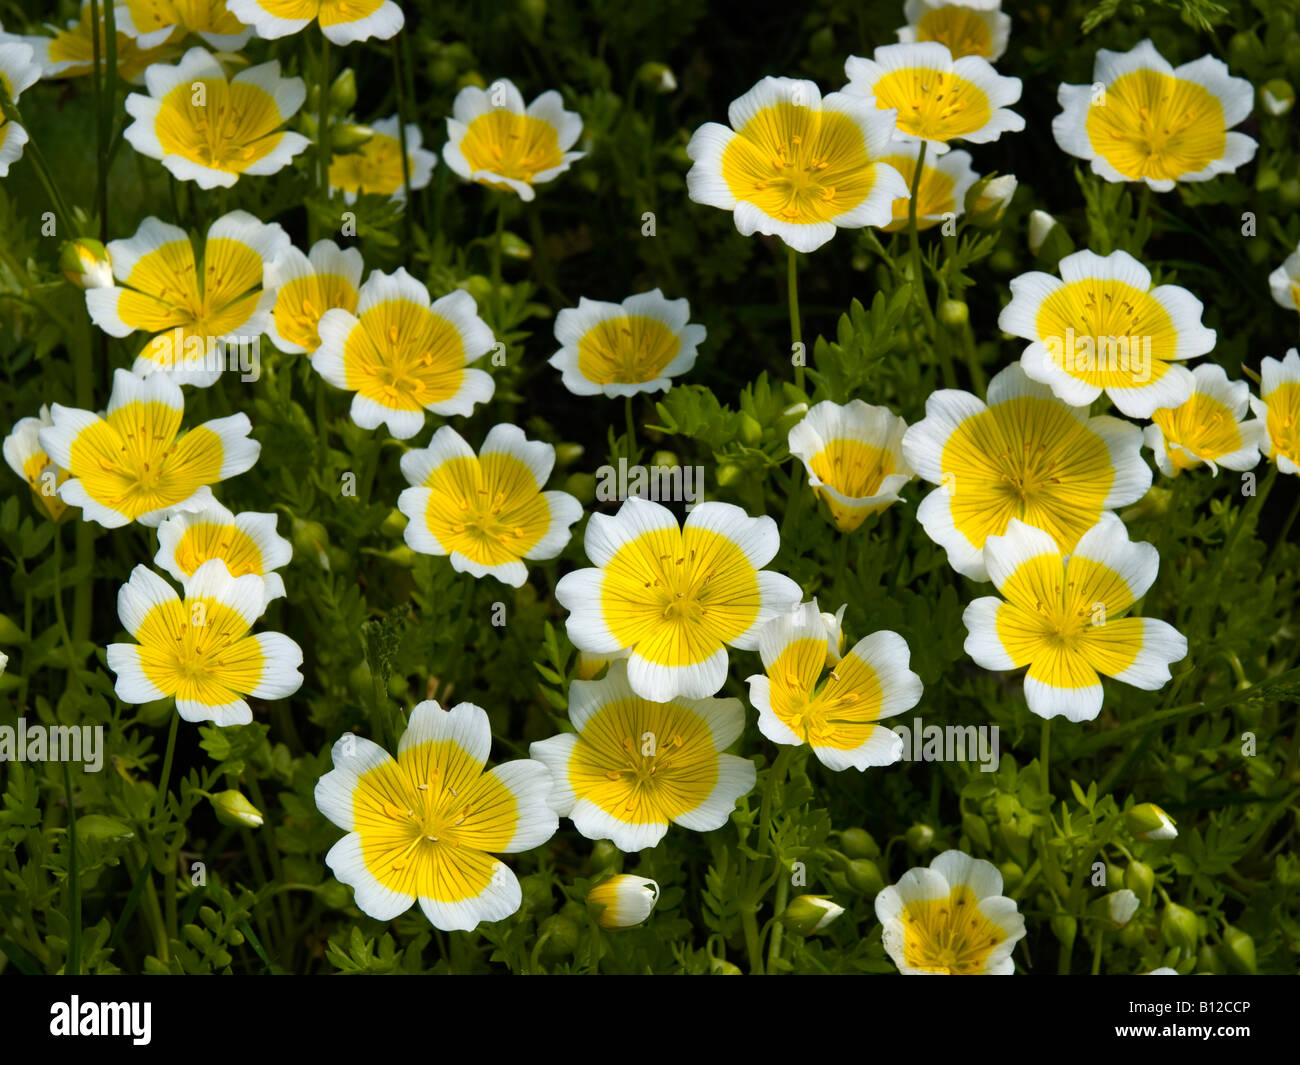 Flowers of the Fried egg plant or poached egg plant Limnanthes douglasii for sale in a garden centre Stock Photo